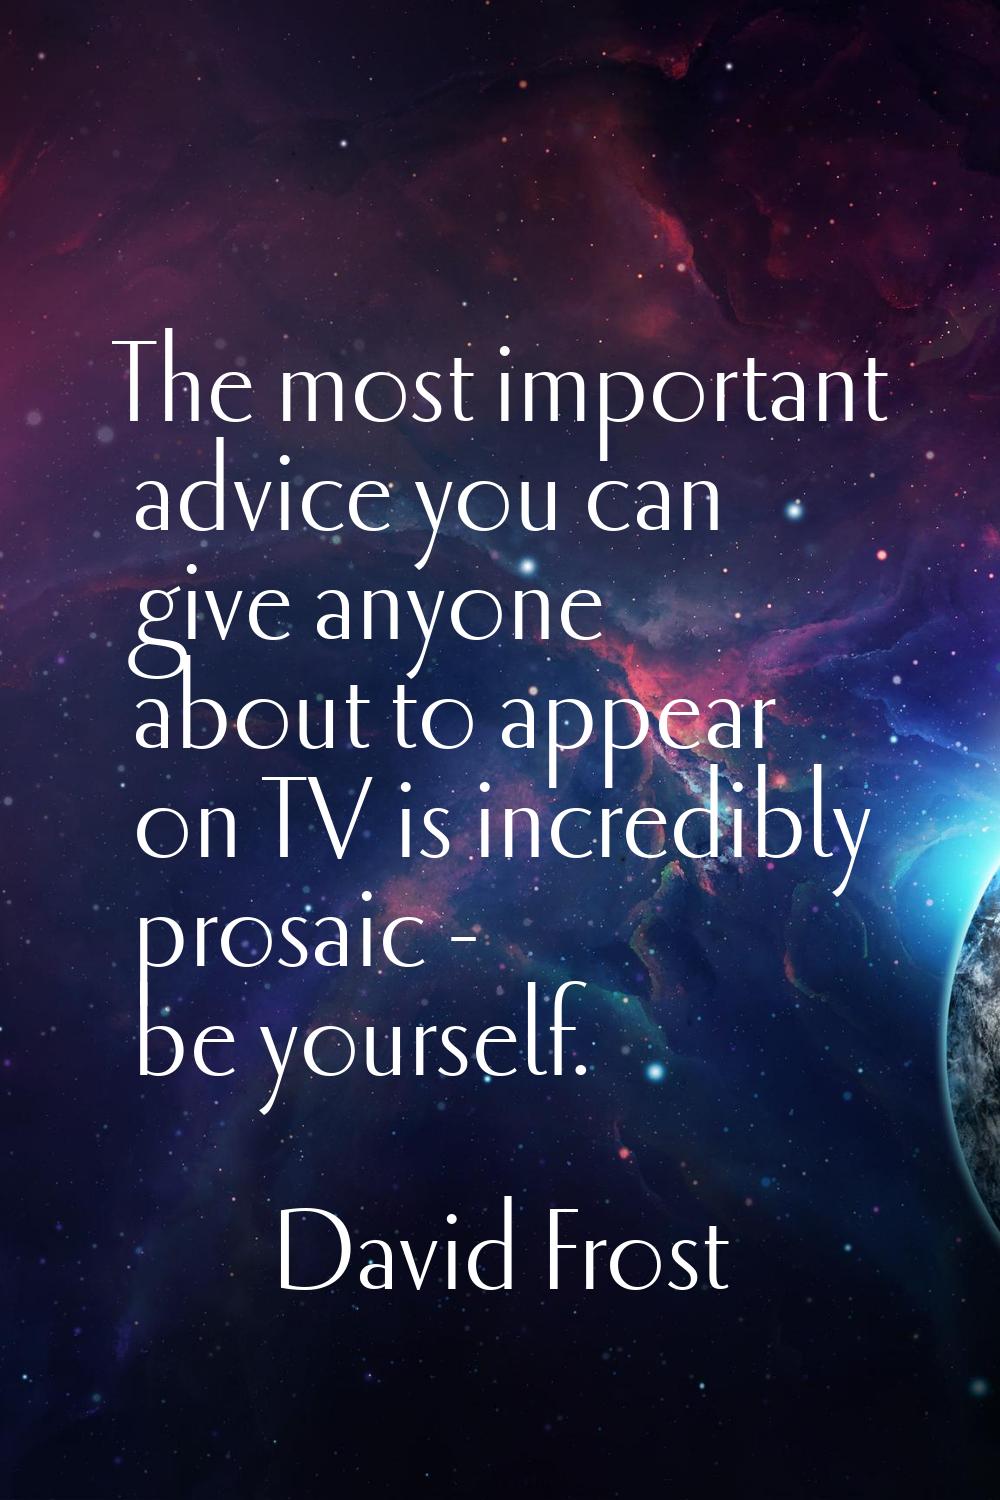 The most important advice you can give anyone about to appear on TV is incredibly prosaic - be your